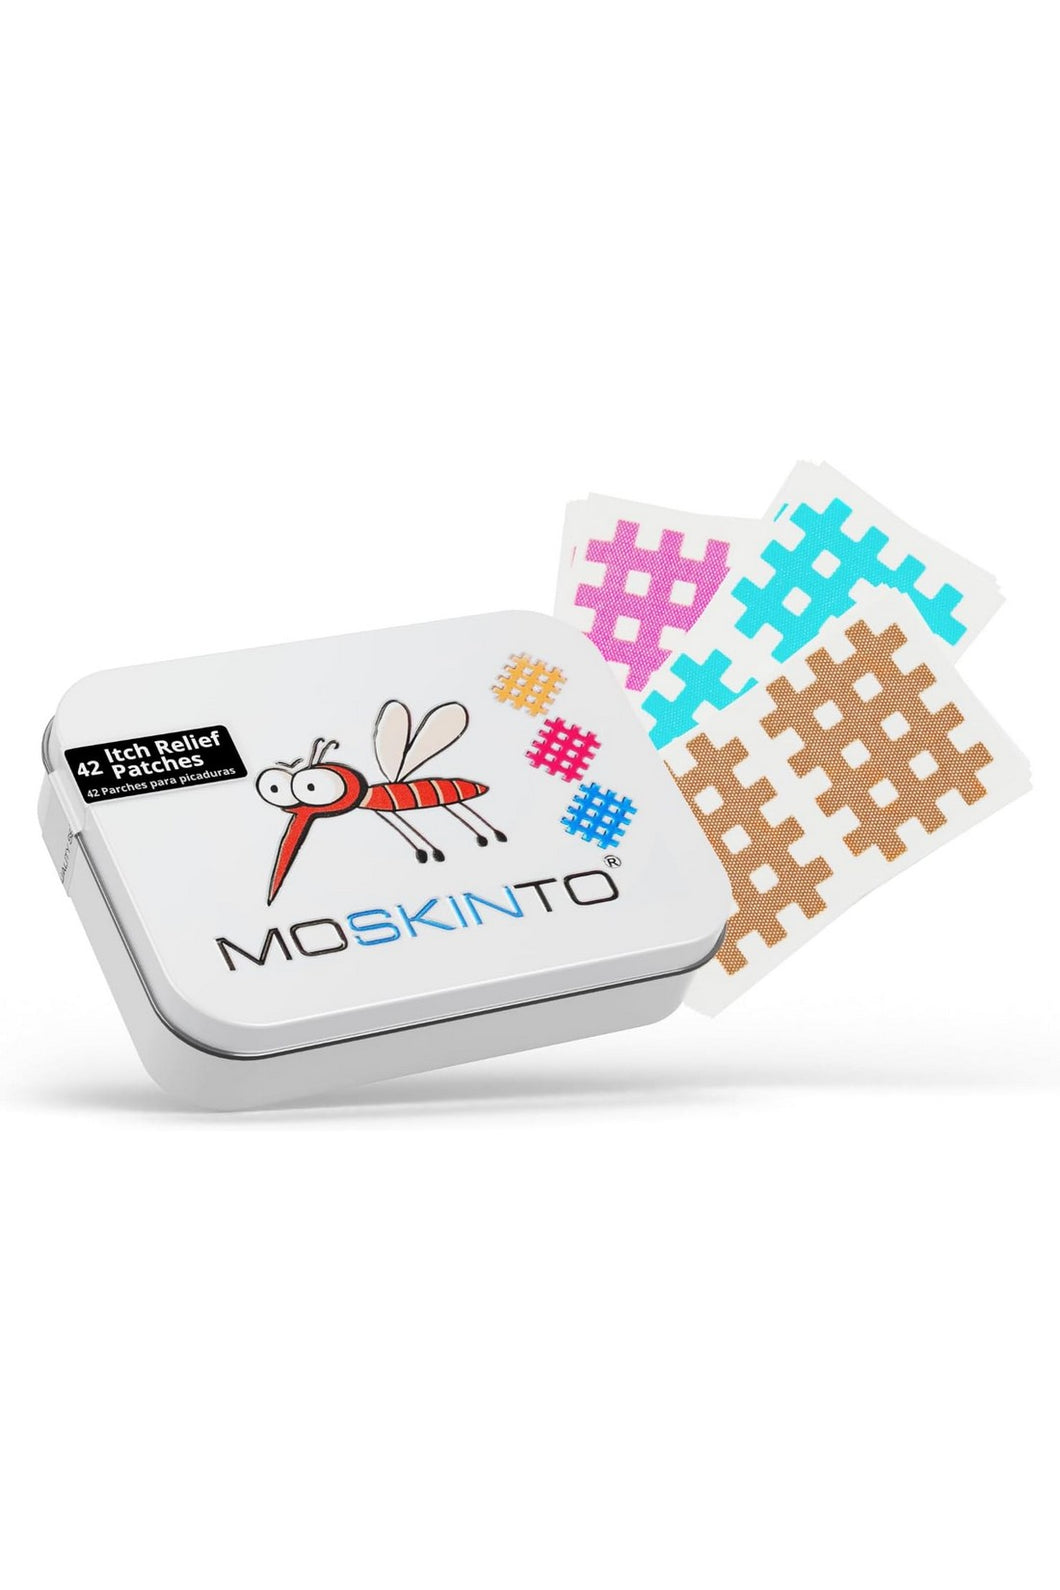 Moskinto Family Box 42 Plasters In Tin Box